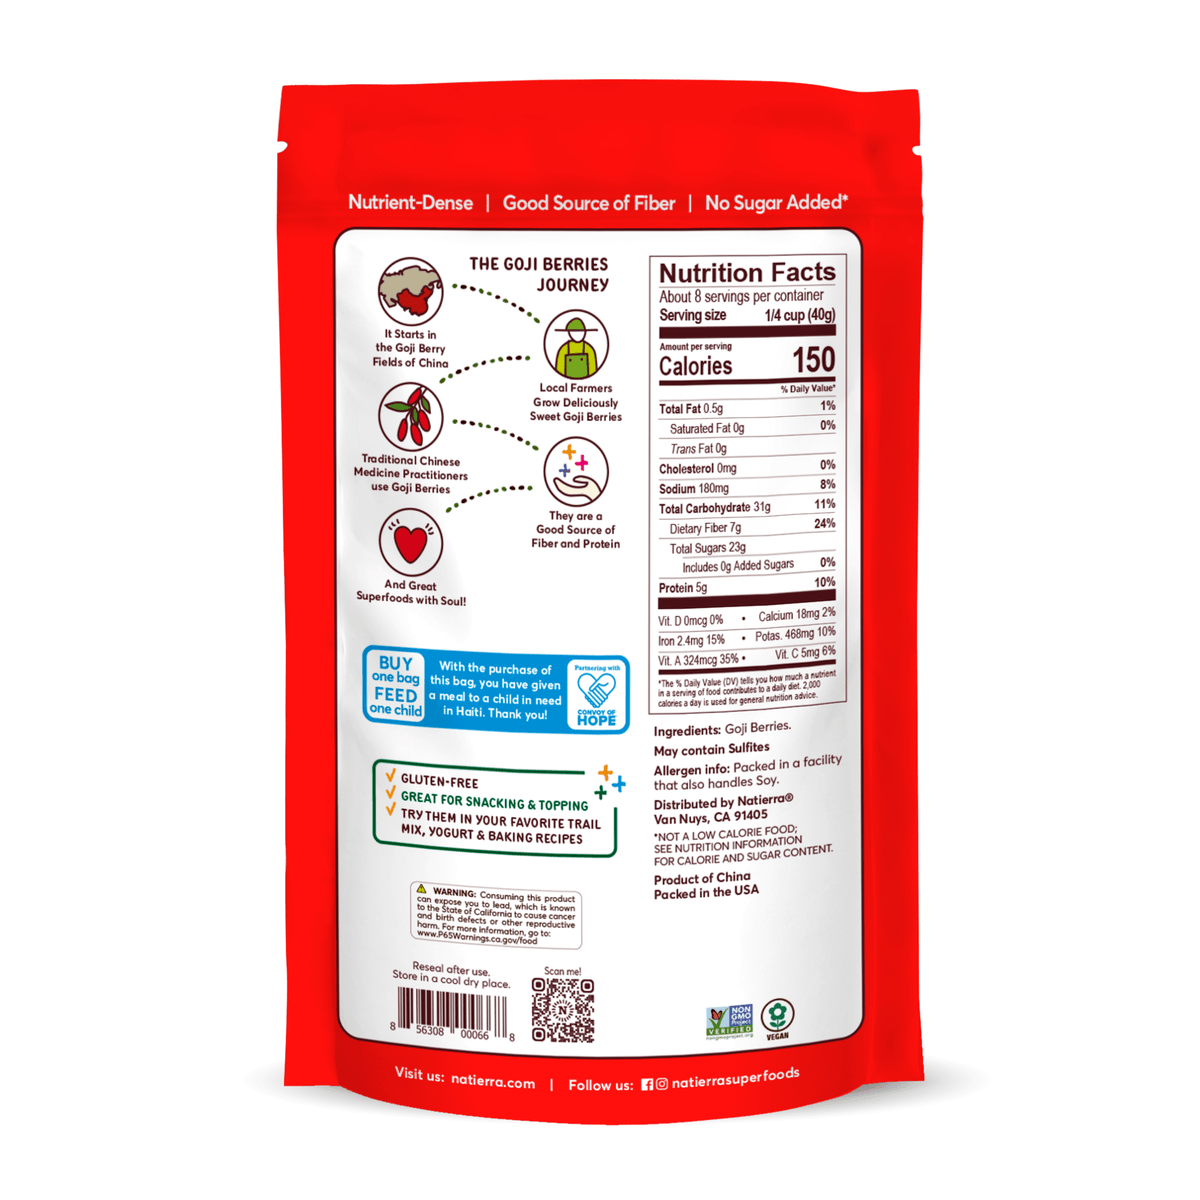 Natierra Goji Berries bag with nutrition facts, journey and main product claims. 